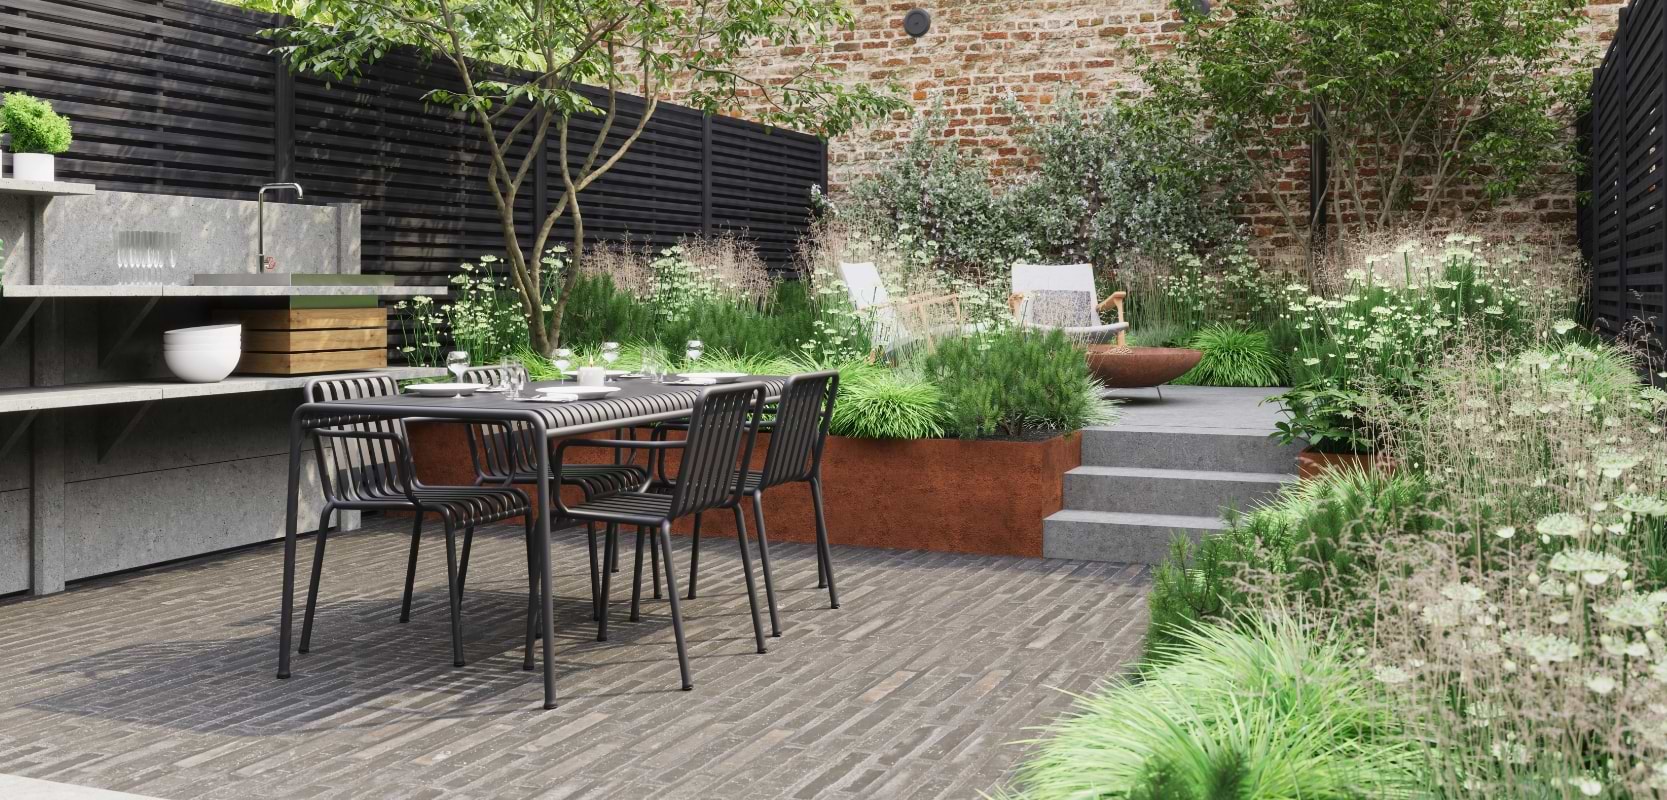 Garden Design by Soto Gardens featuring outdoor kitchen and dining area plus stocked borders